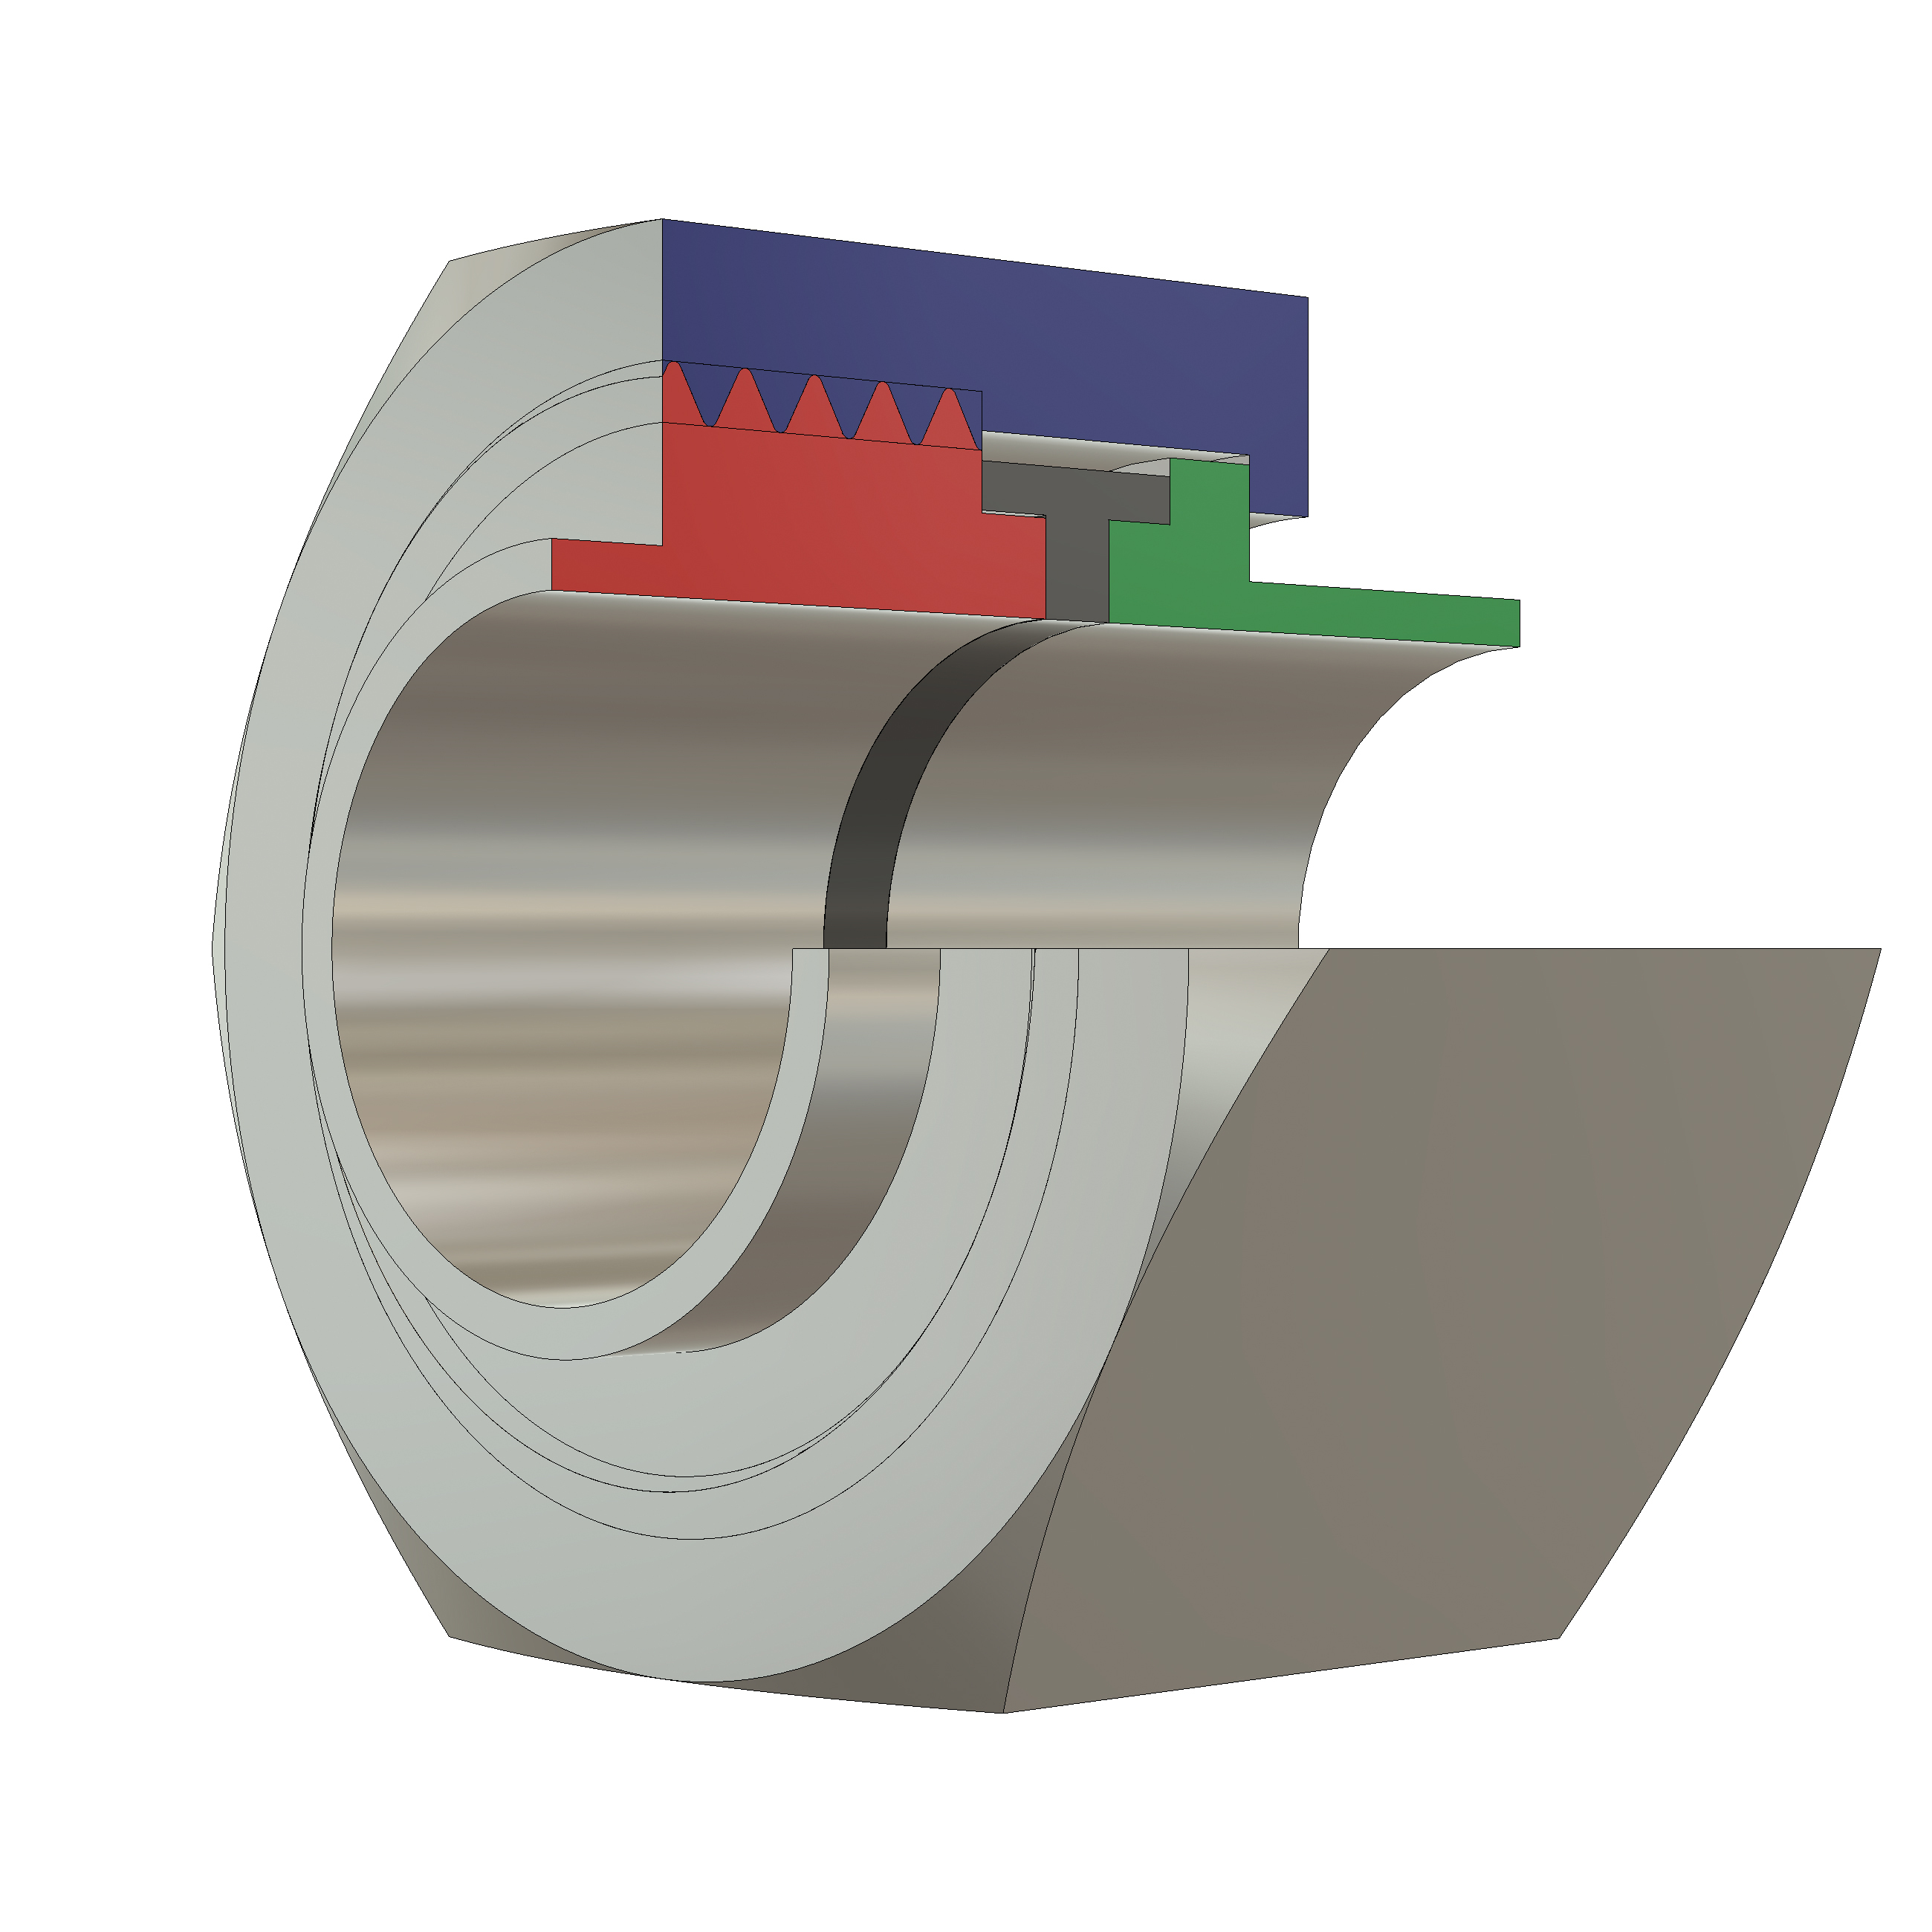 IDF_Union_coupling-specifications-3D_CAD_Files_3A